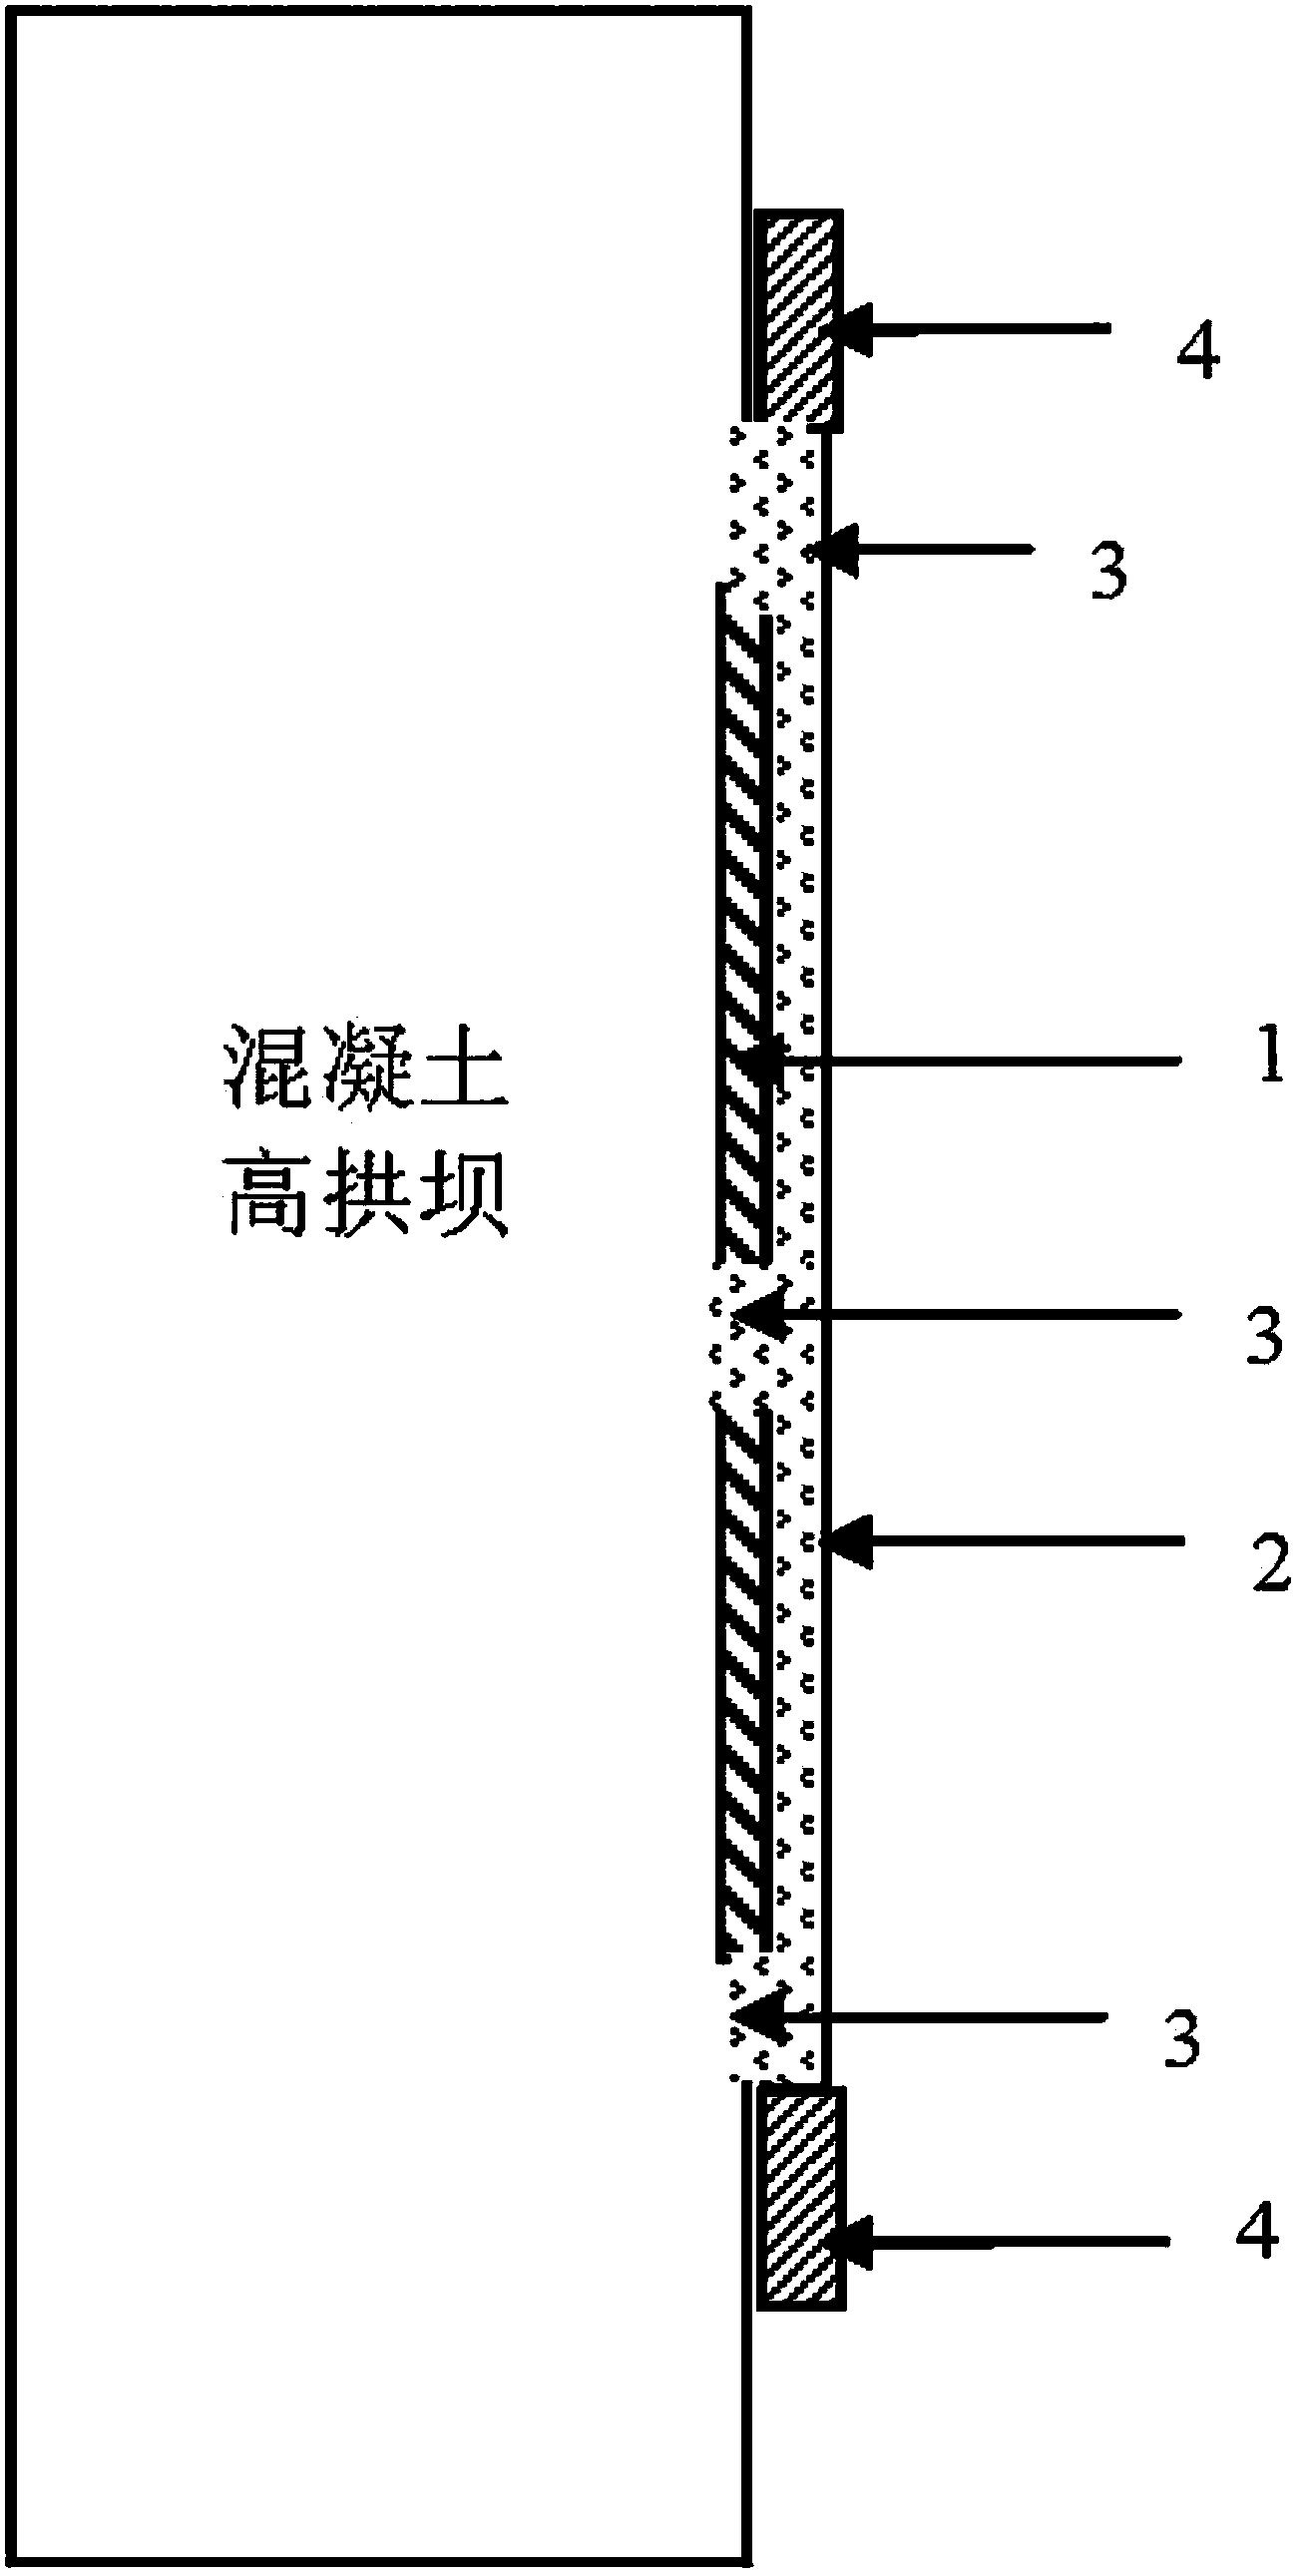 Construction method for flexible composite impermeable layer of upstream face of high arch dam